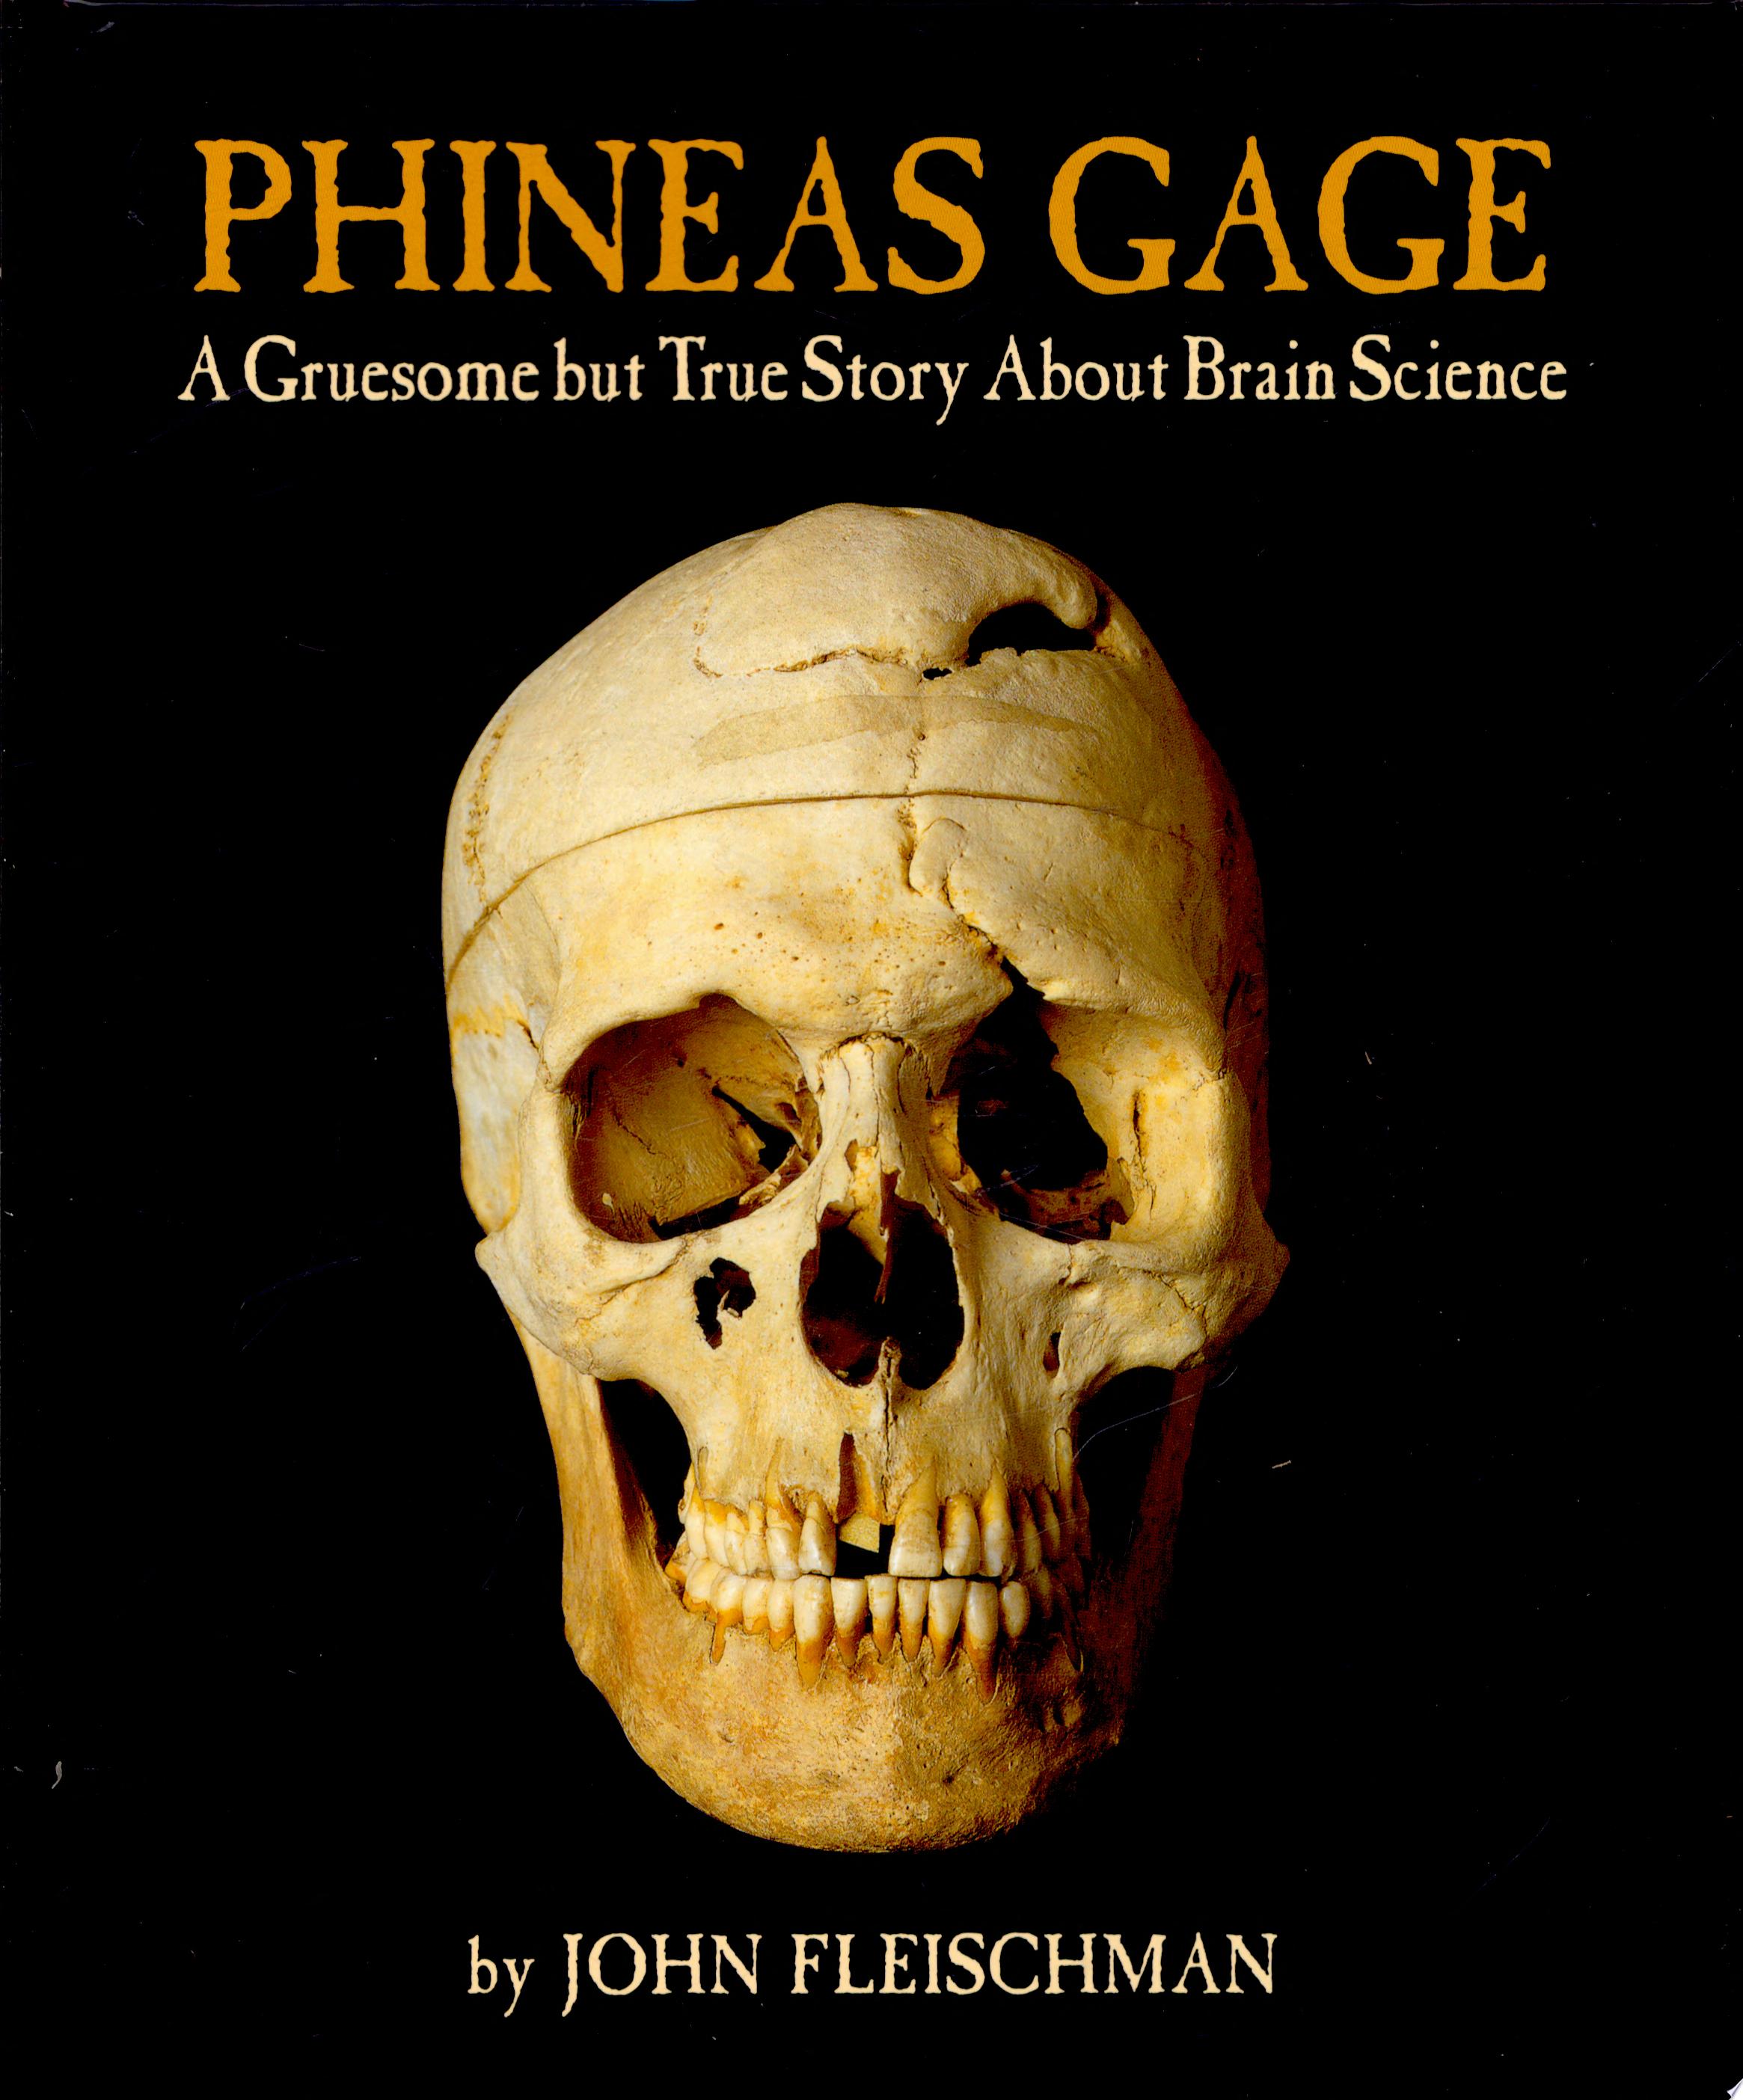 Image for "Phineas Gage"